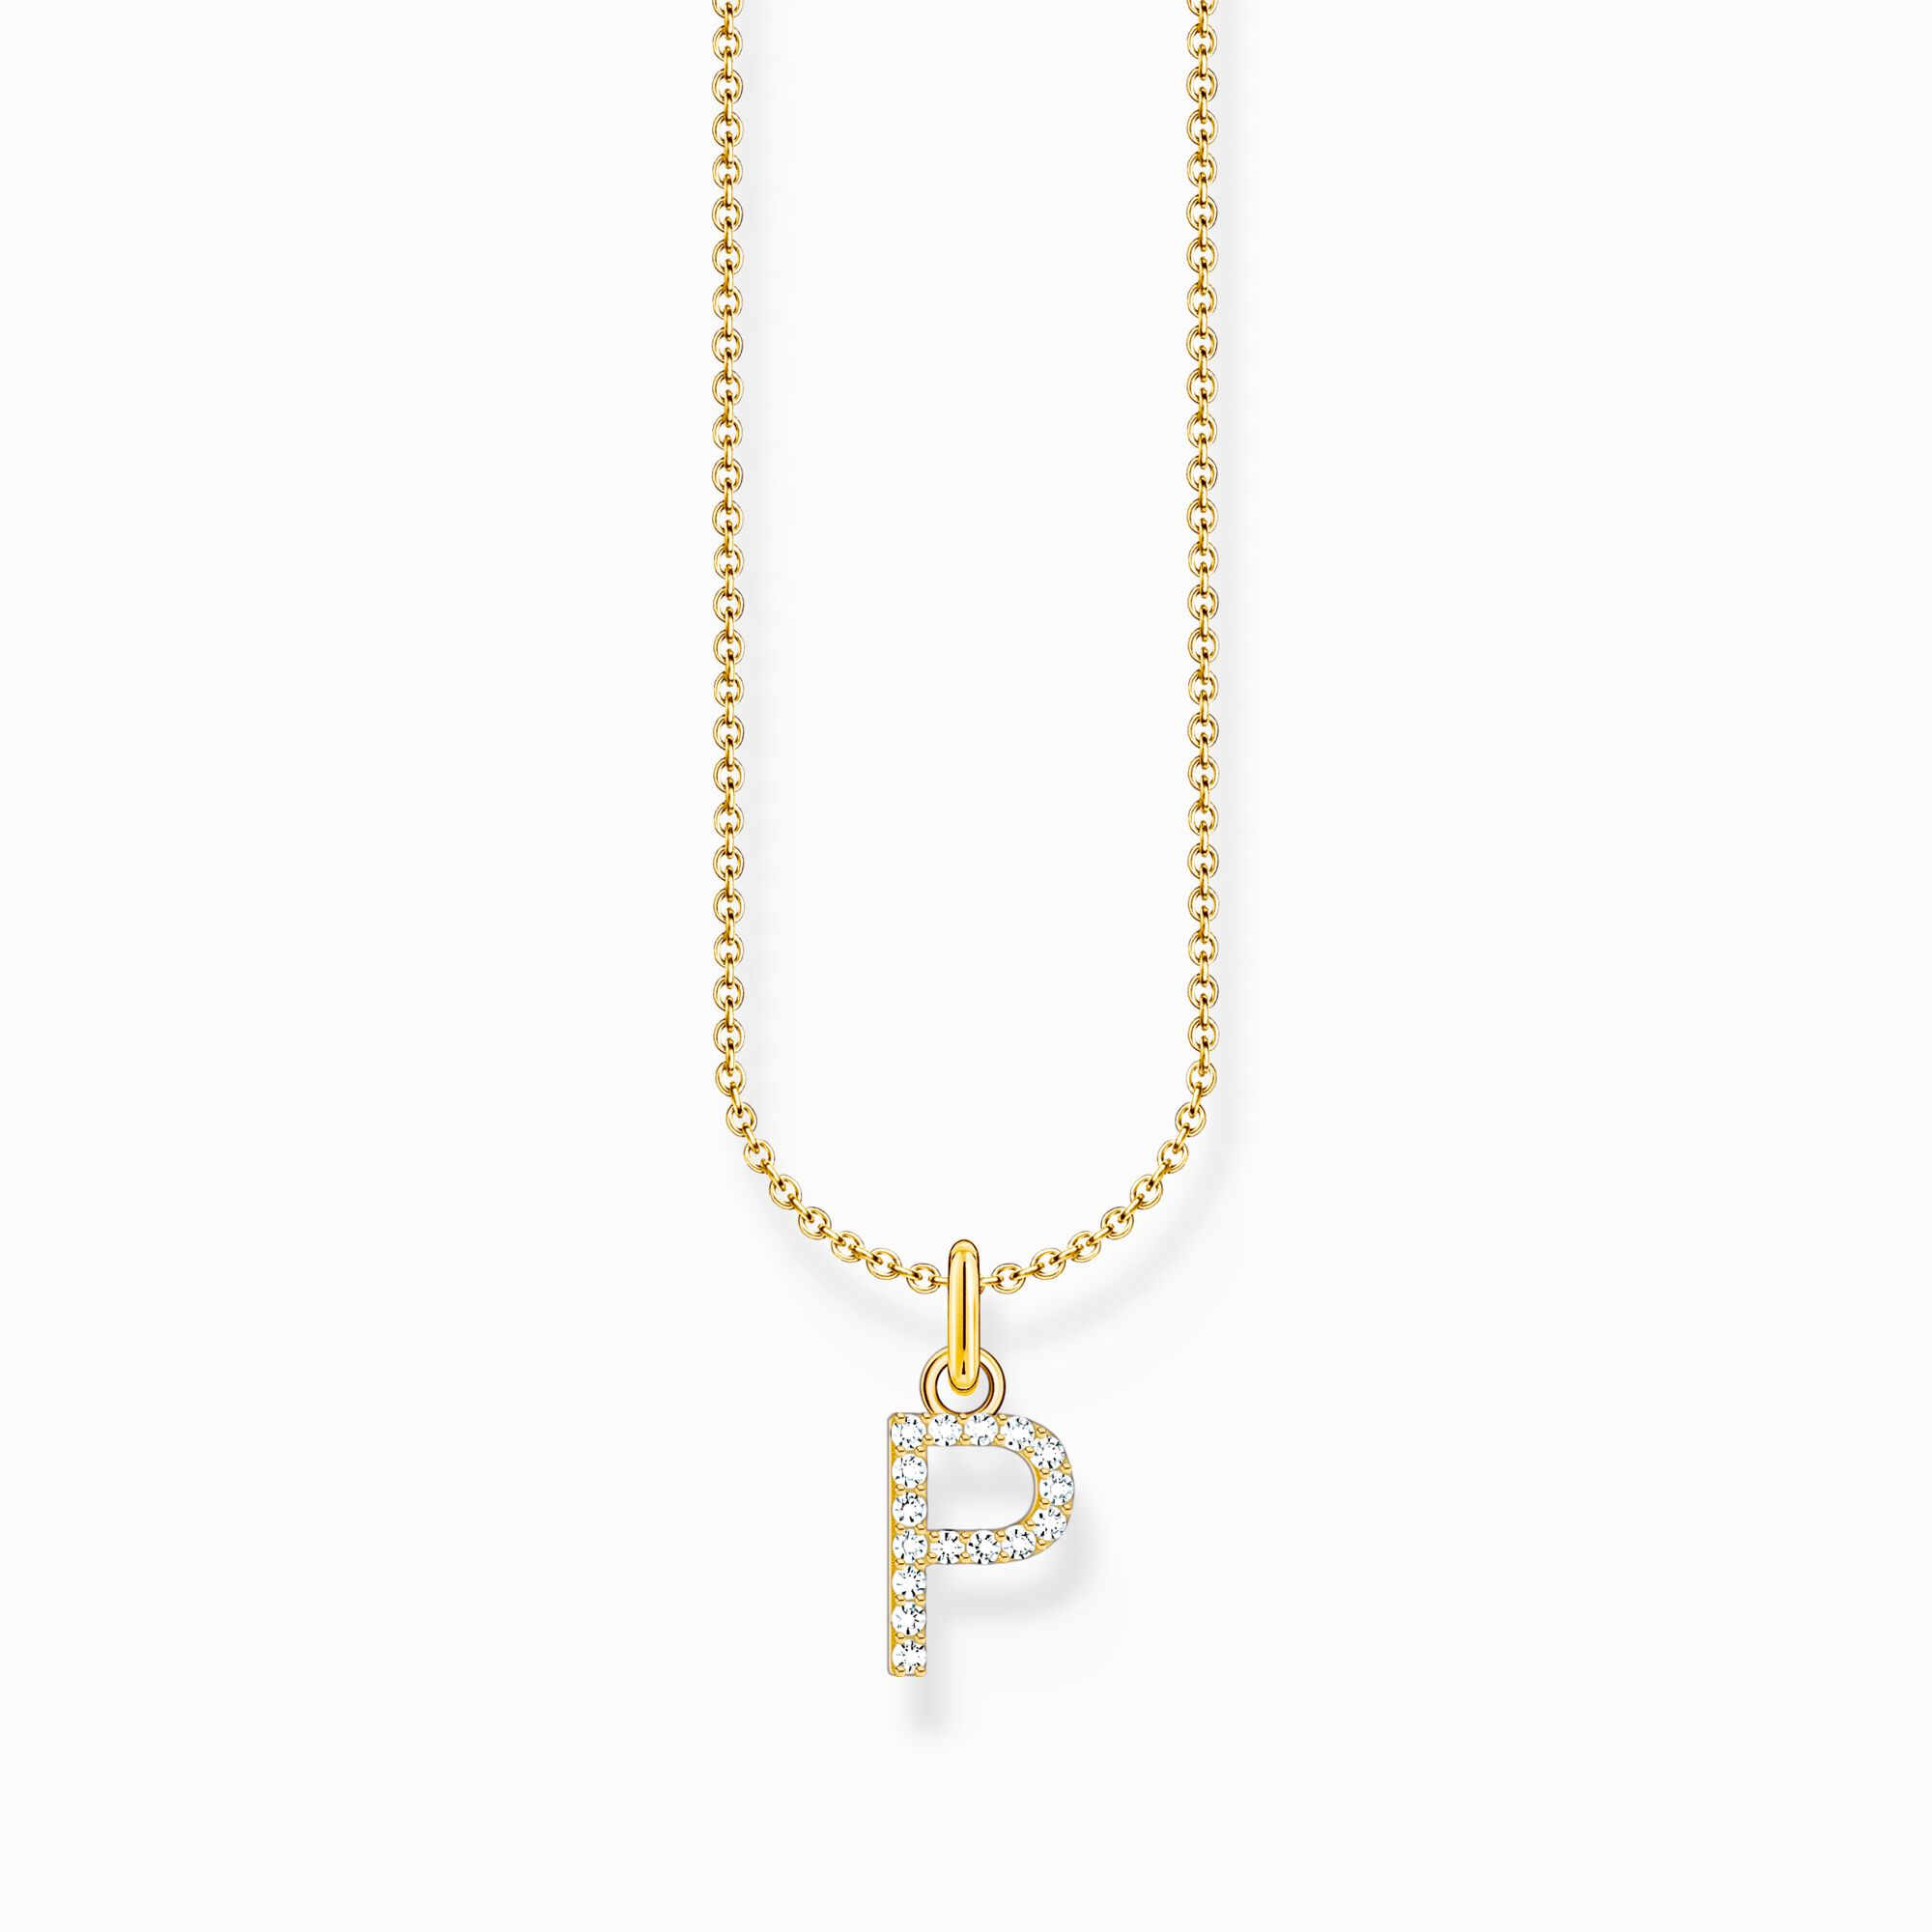 Gold-plated necklace with letter pendant P and white zirconia from the Charming Collection collection in the THOMAS SABO online store